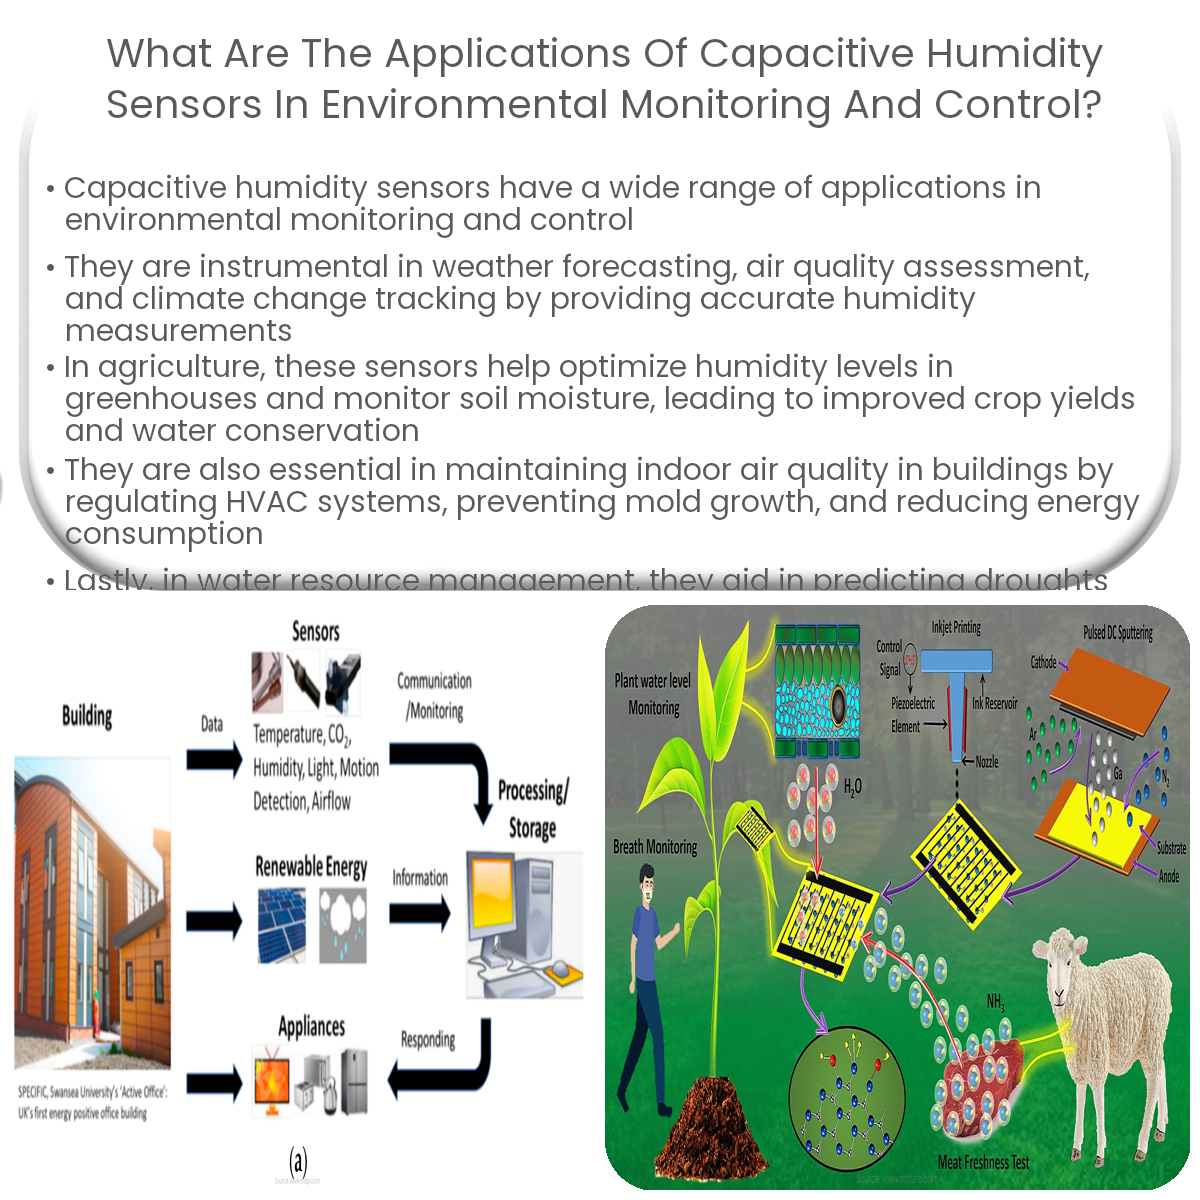 https://www.electricity-magnetism.org/wp-content/uploads/2023/06/what-are-the-applications-of-capacitive-humidity-sensors-in-environmental-monitoring-and-control.png